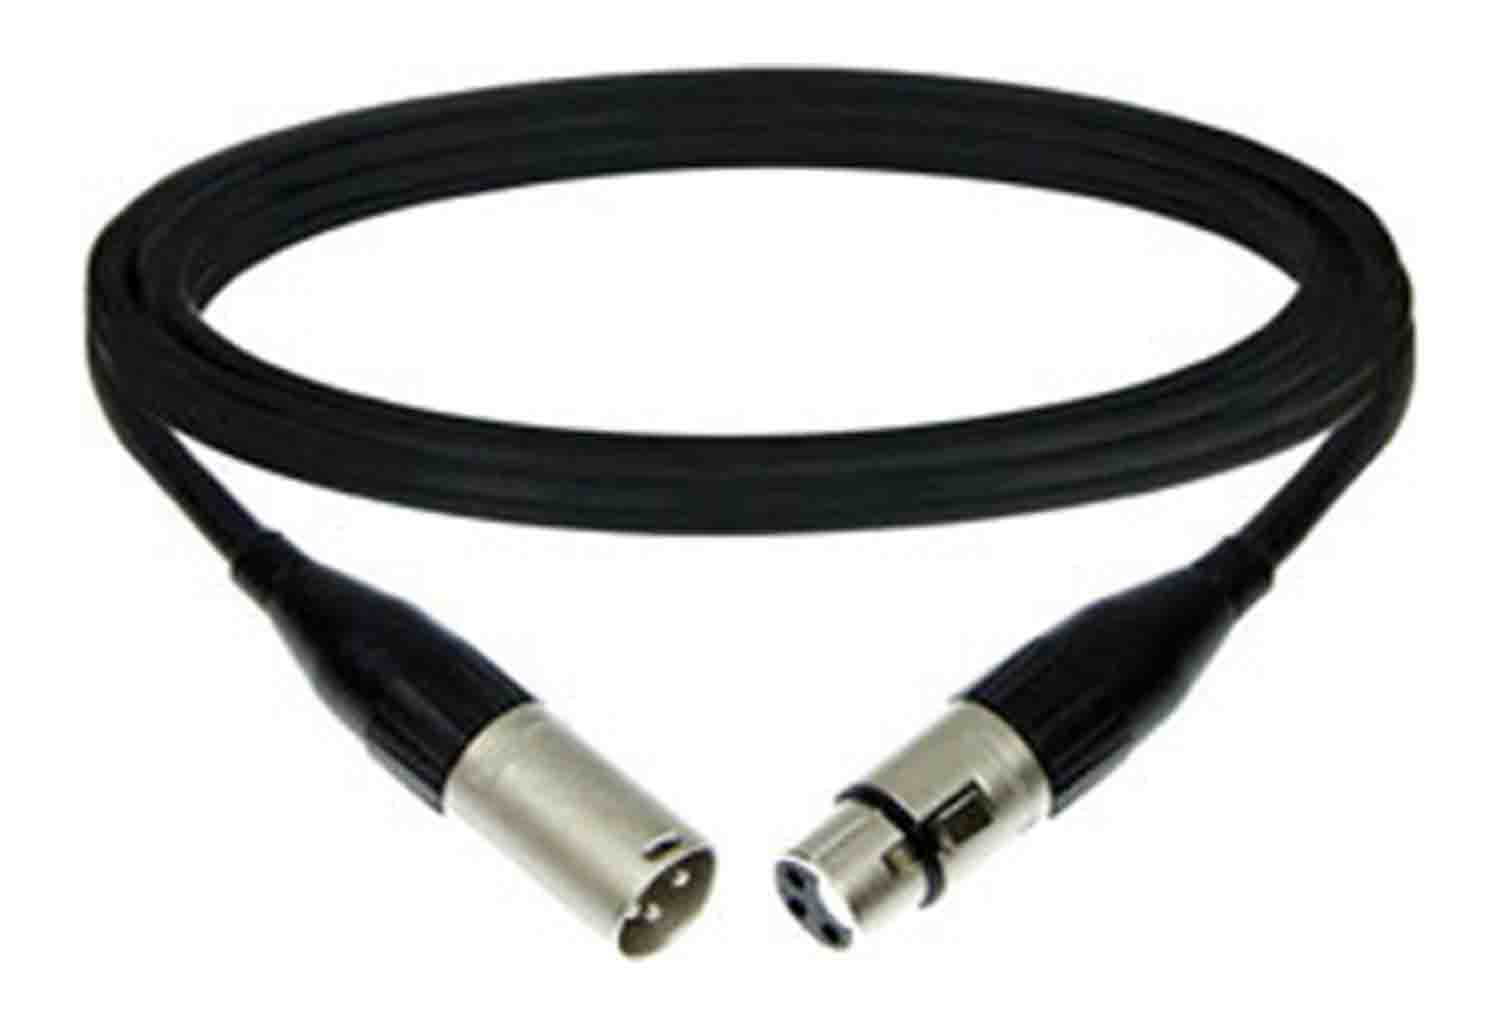 Pro Co EXMN-5, 5 Inch Excellines XLRF to XLRM Microphone Cable - Hollywood DJ